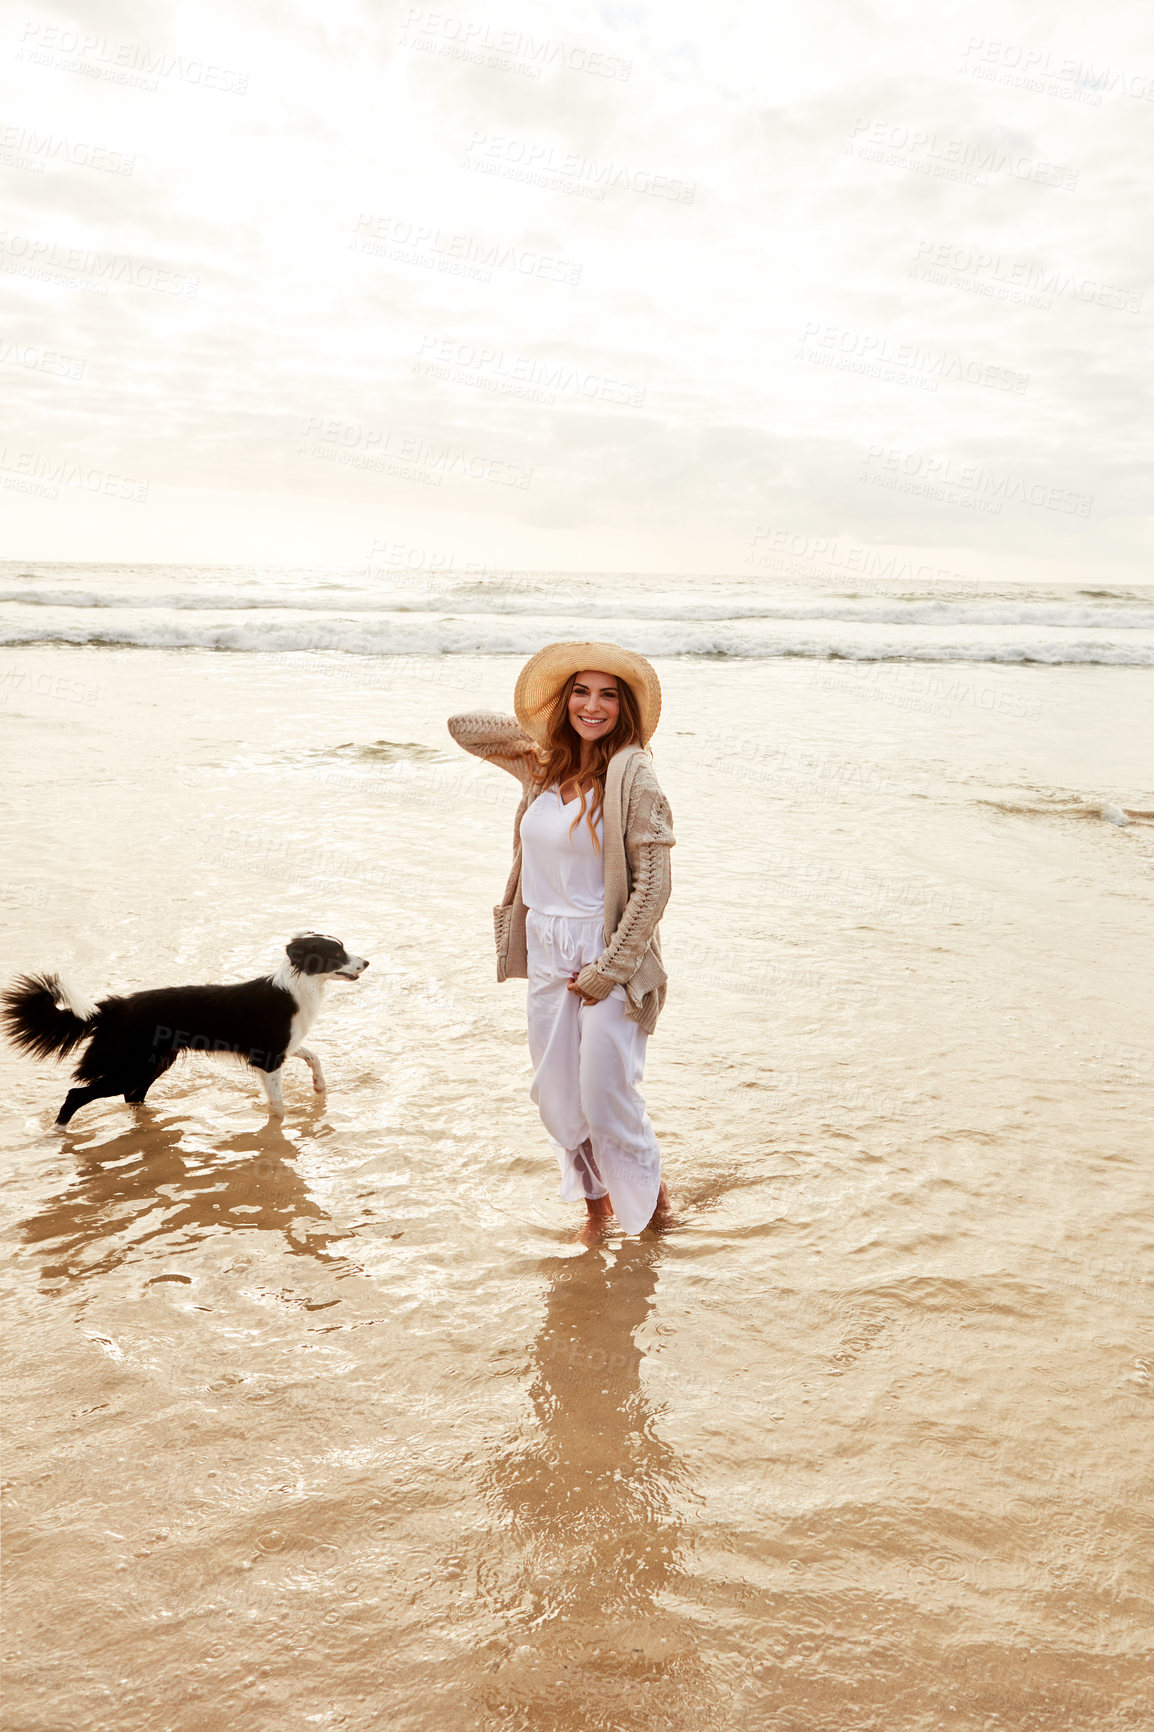 Buy stock photo Portrait of a young woman spending some time with her dog at the beach